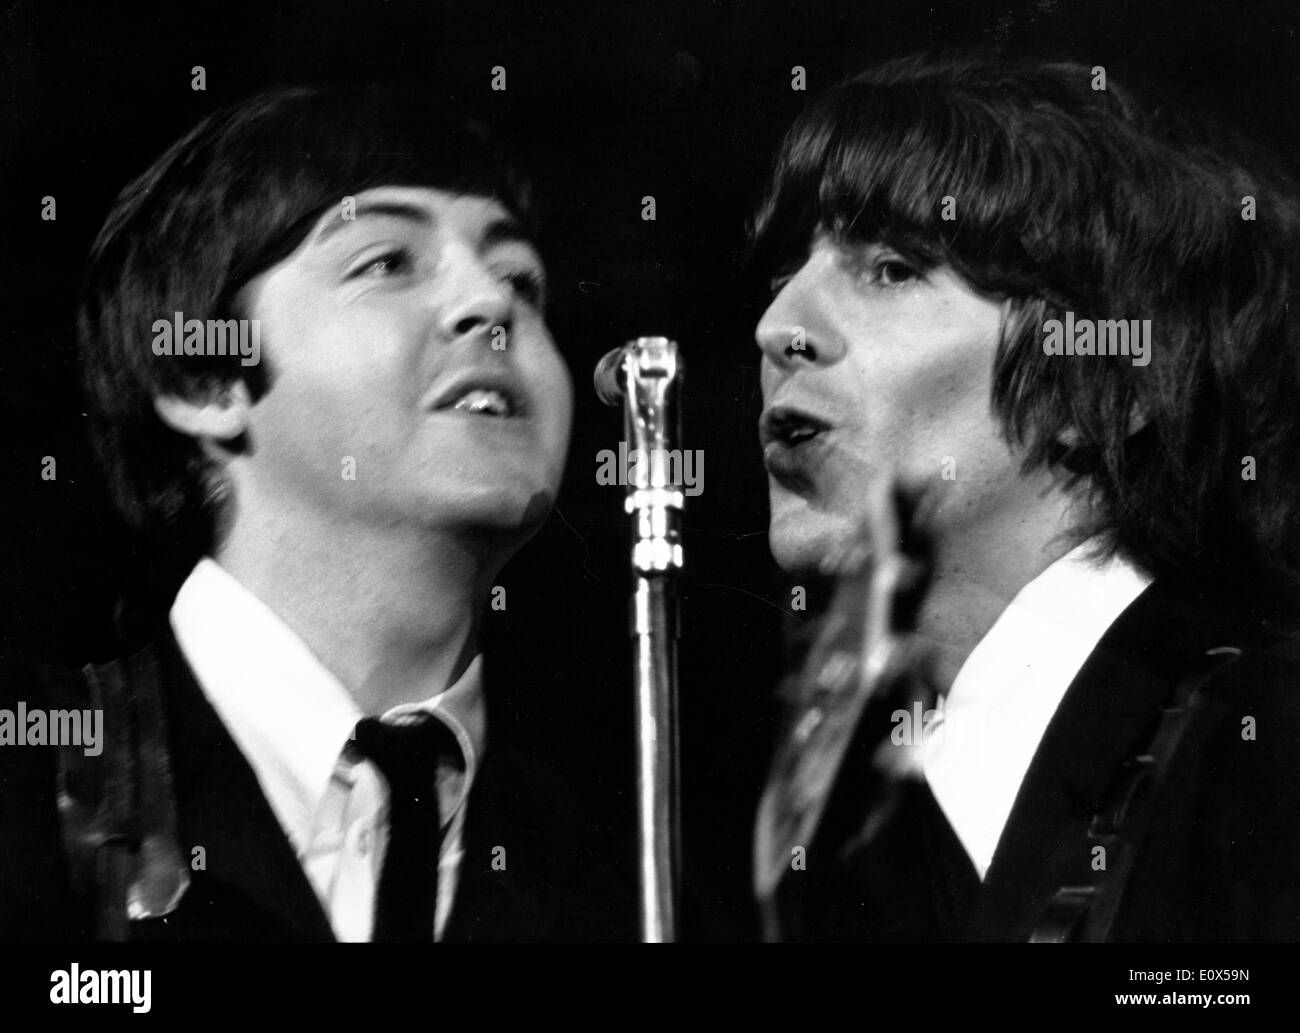 The Beatles members Paul McCartney and George Harrison during a show Stock Photo